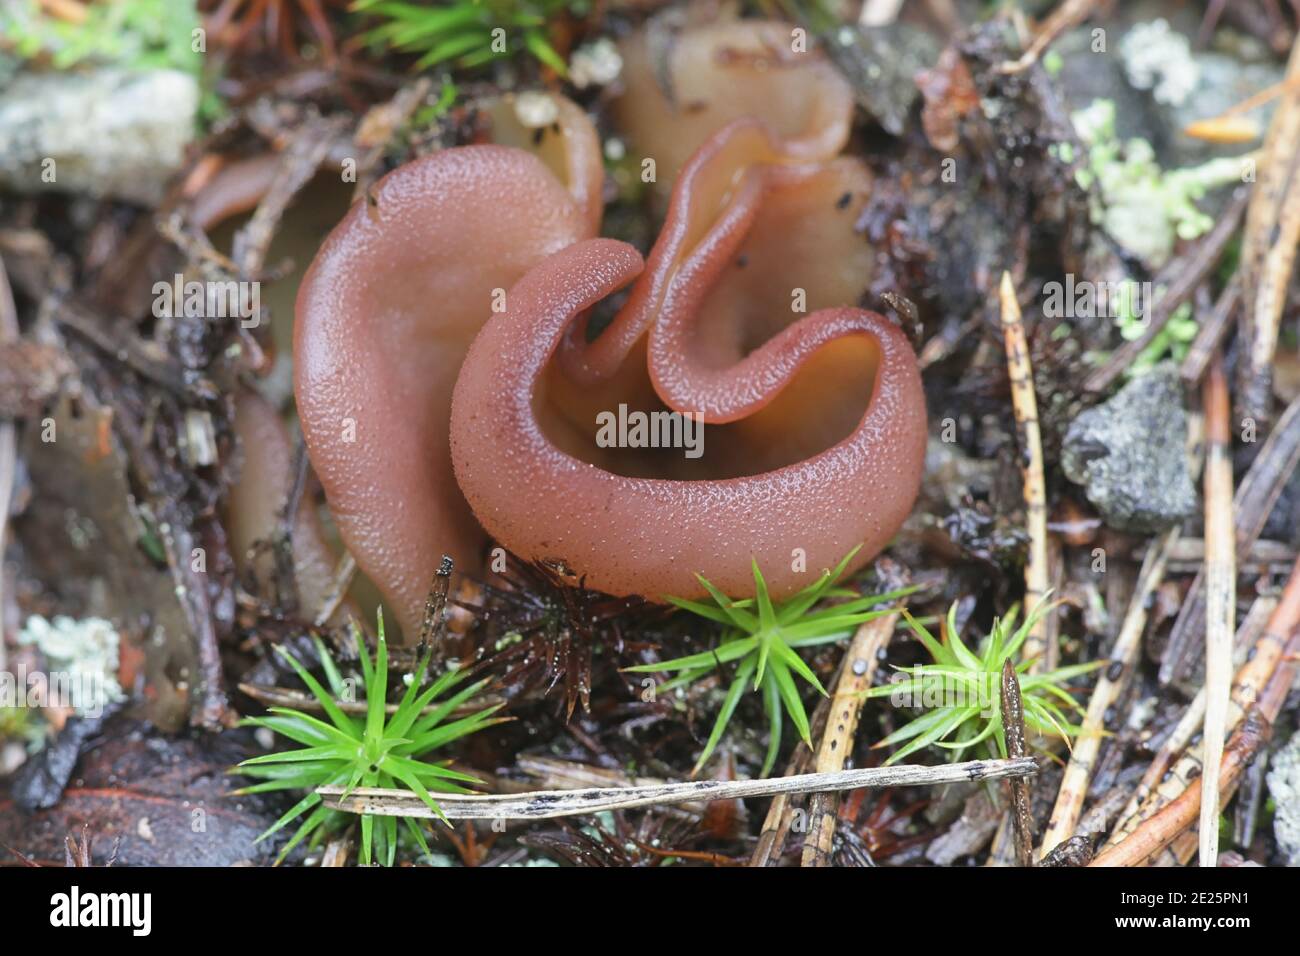 Peziza badia, commonly known as the Bay Cup fungus, wild mushroom from Finland Stock Photo